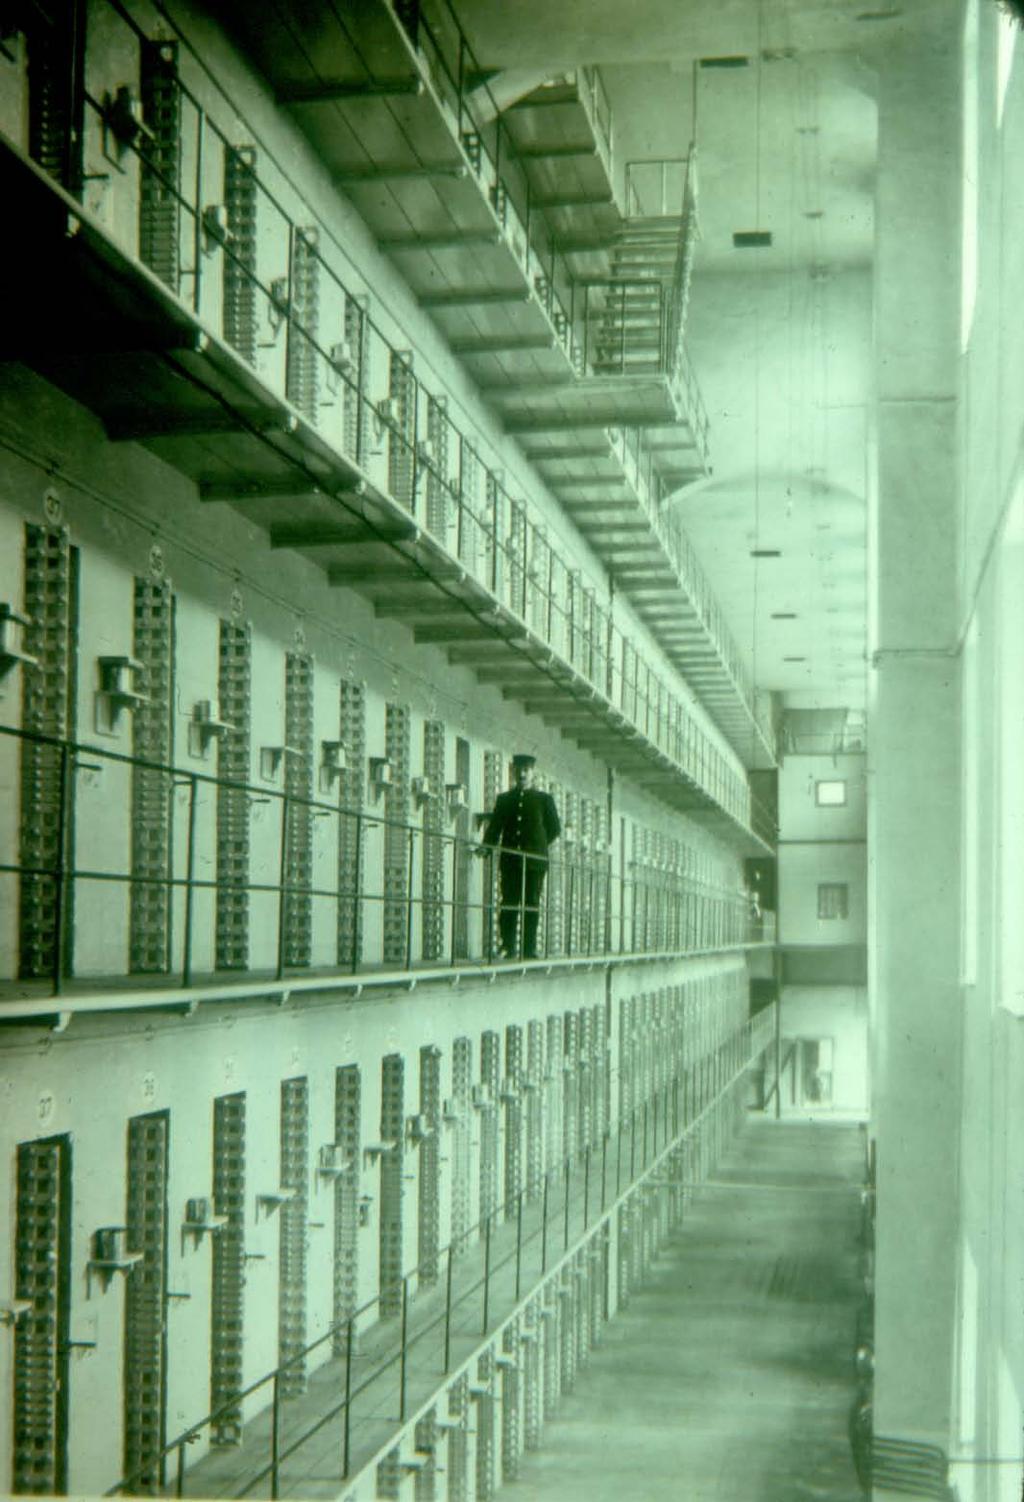 Since the cells were arranged back to back in tiers, there was no way for an inmate to tunnel through his cell wall to